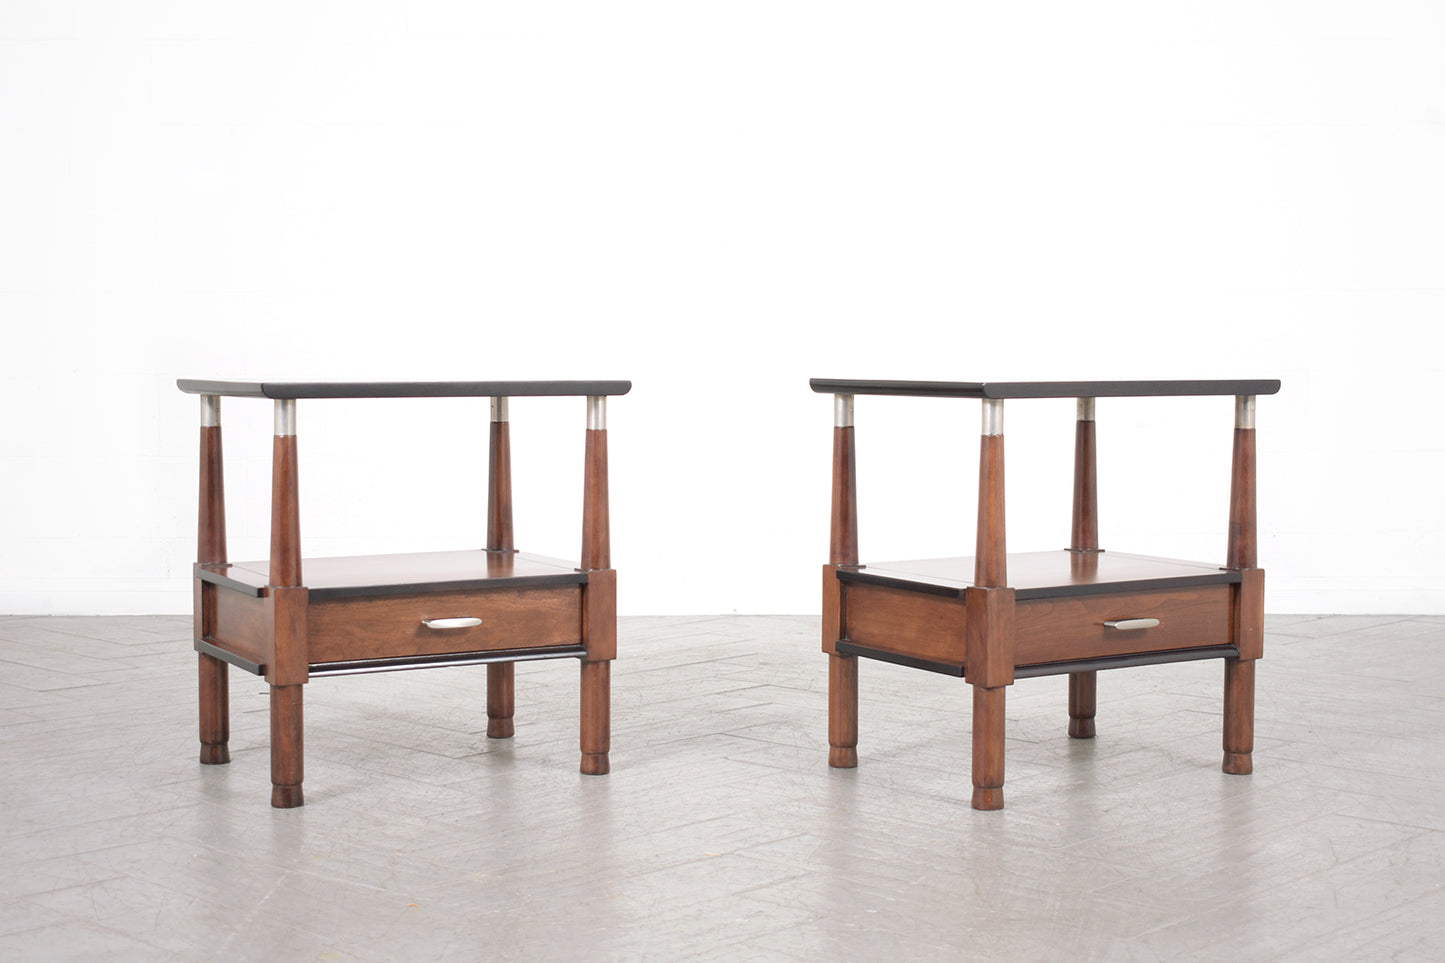 Refined Mid-Century Modern Nightstands: A Blend of Elegance and Functionality